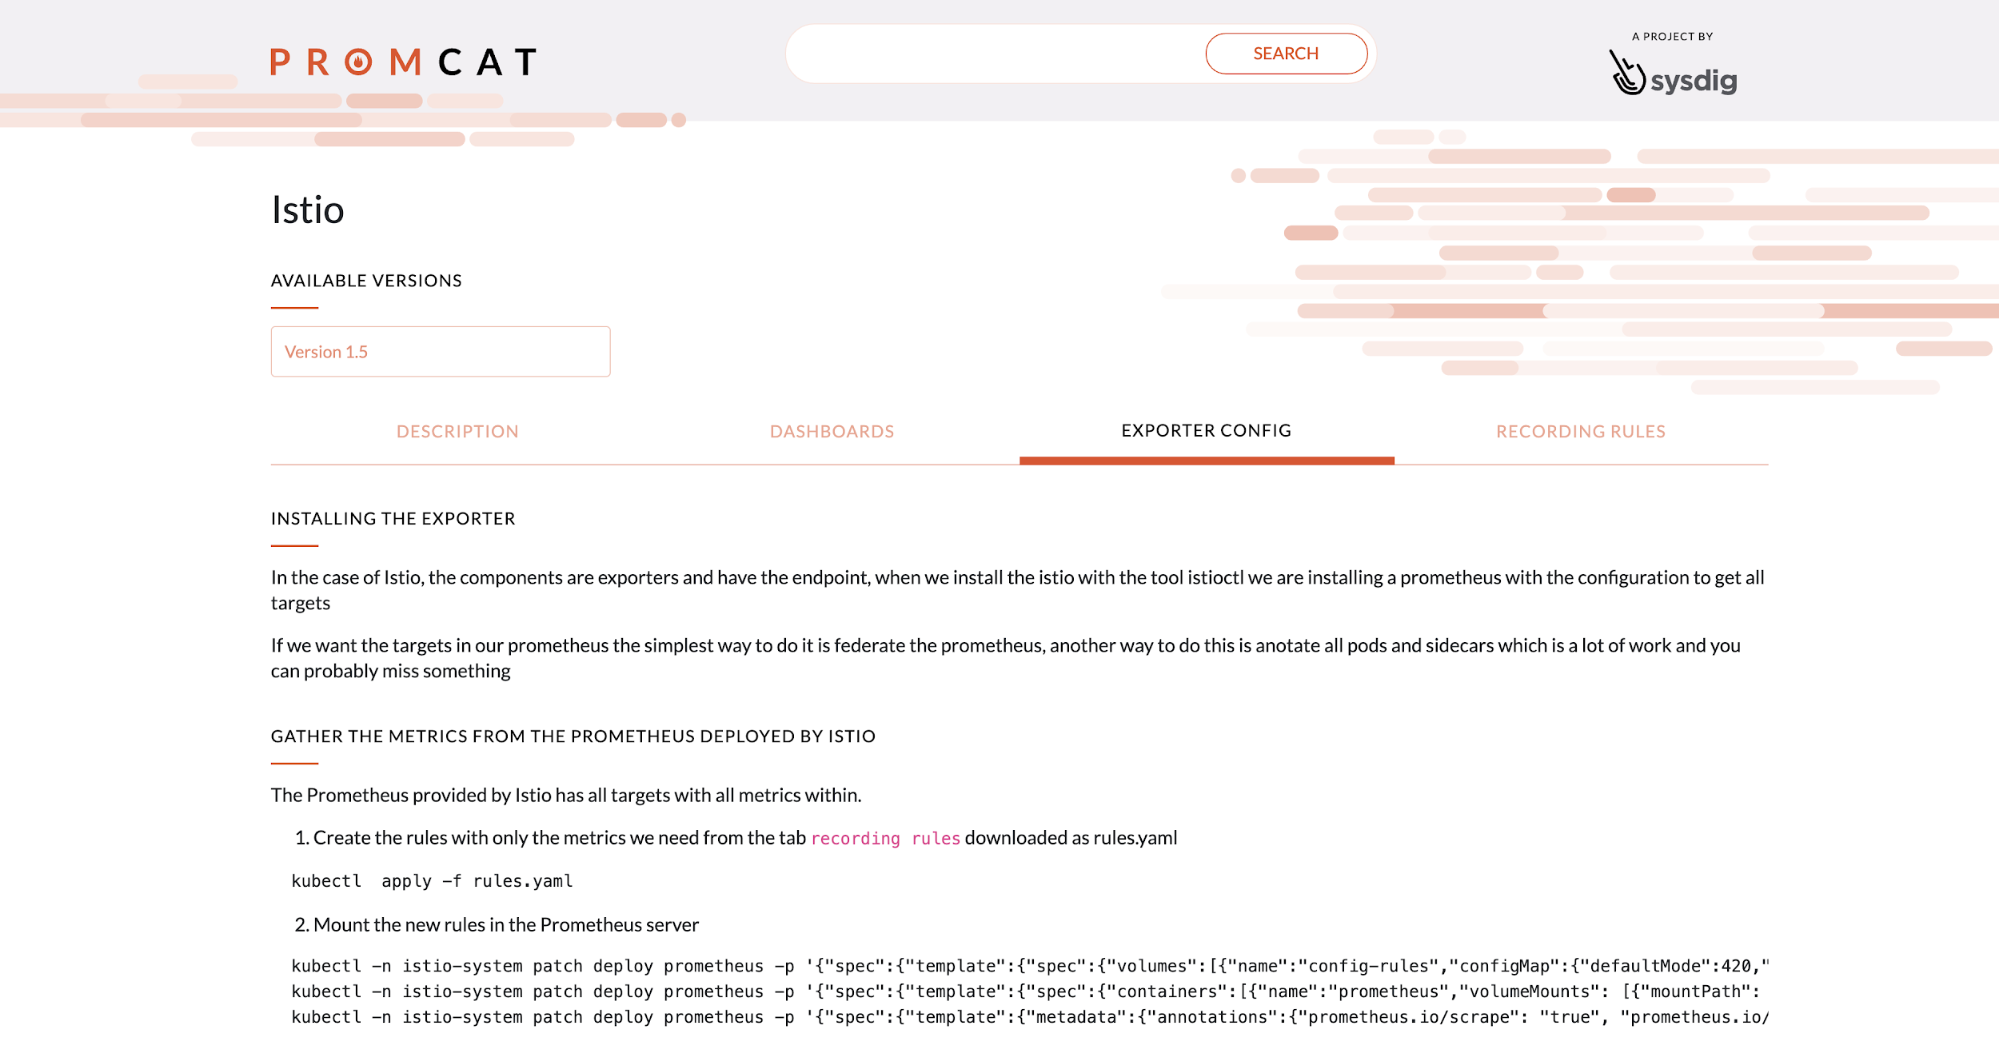 Promcat contains instructions on how to configure the exporter to monitor Istio